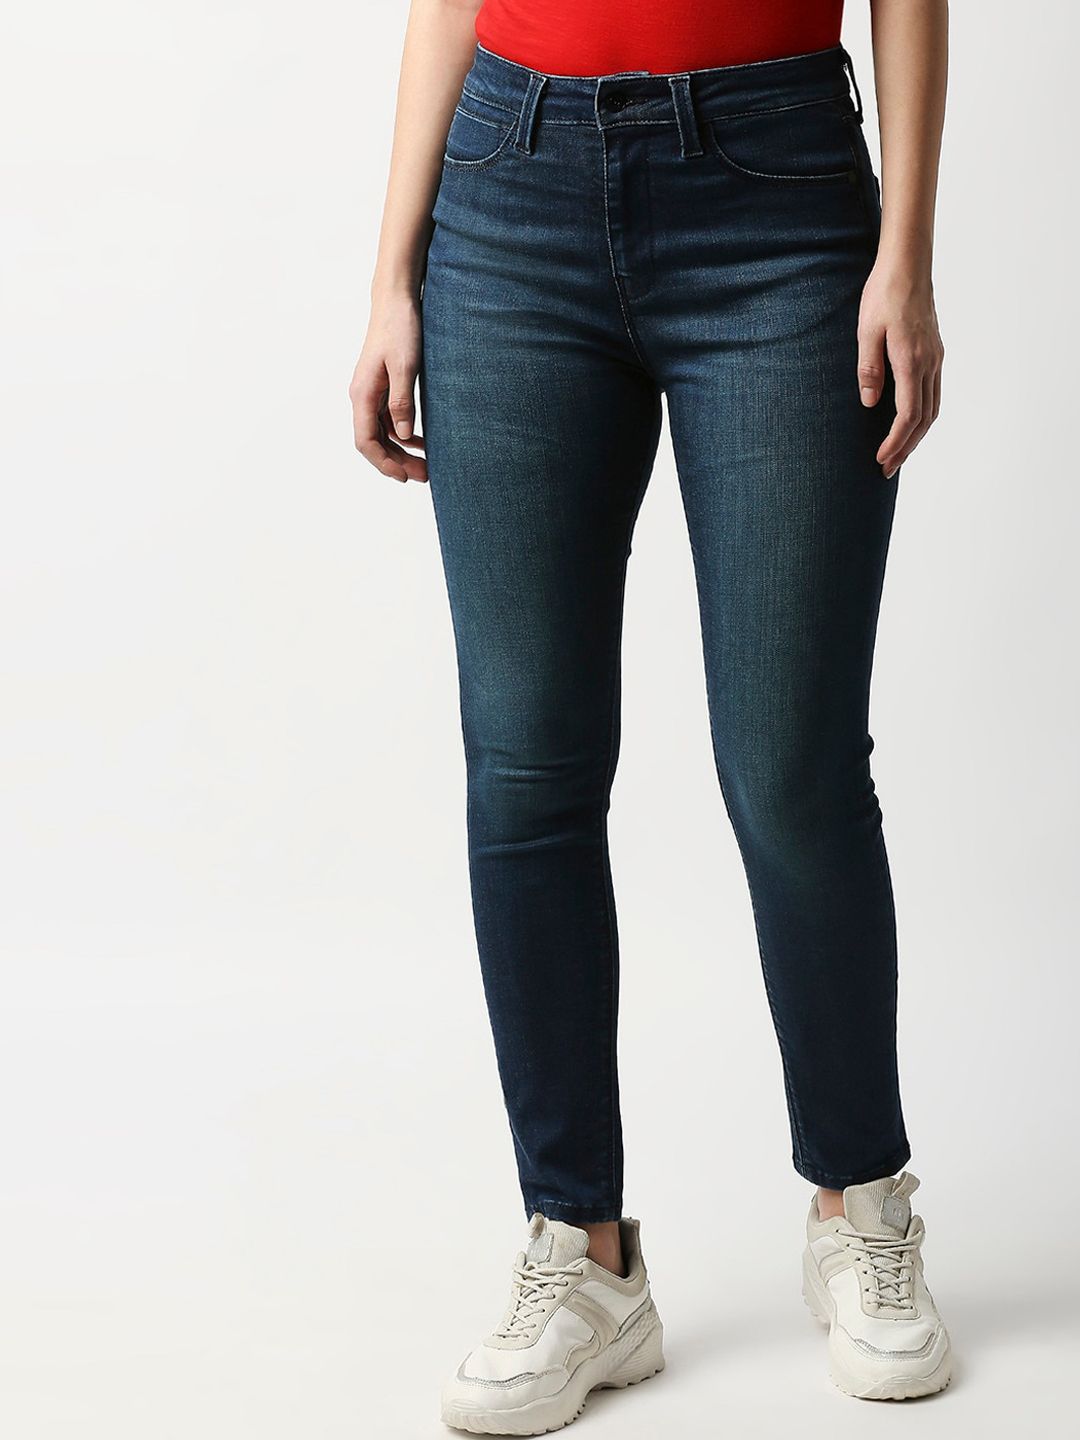 Pepe Jeans Women Blue Skinny Fit High-Rise Light Fade Jeans Price in India